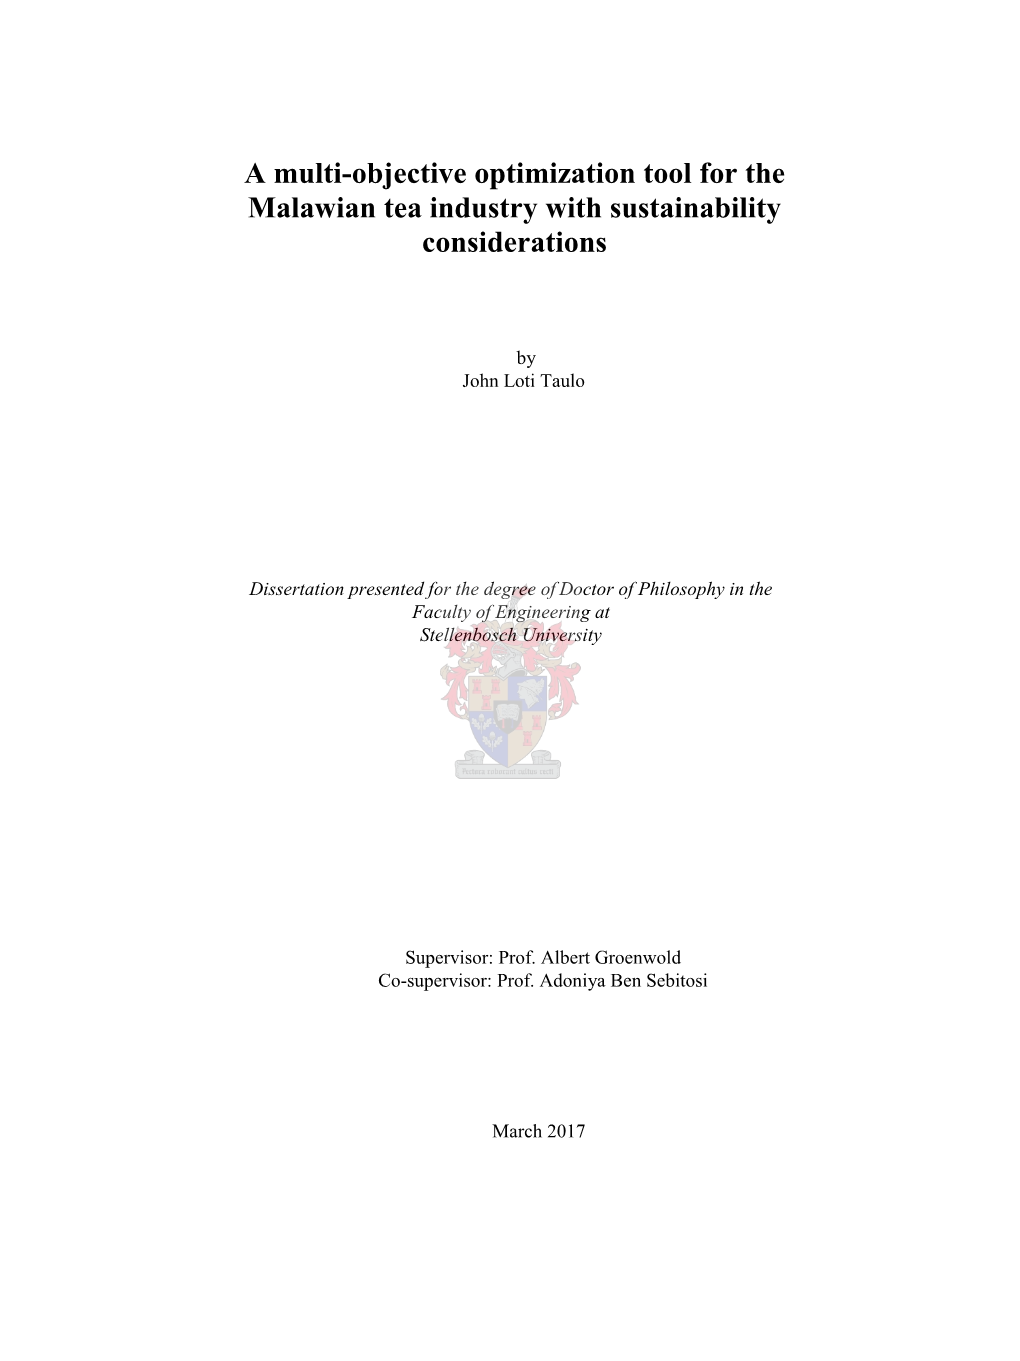 A Multi-Objective Optimization Tool for the Malawian Tea Industry with Sustainability Considerations